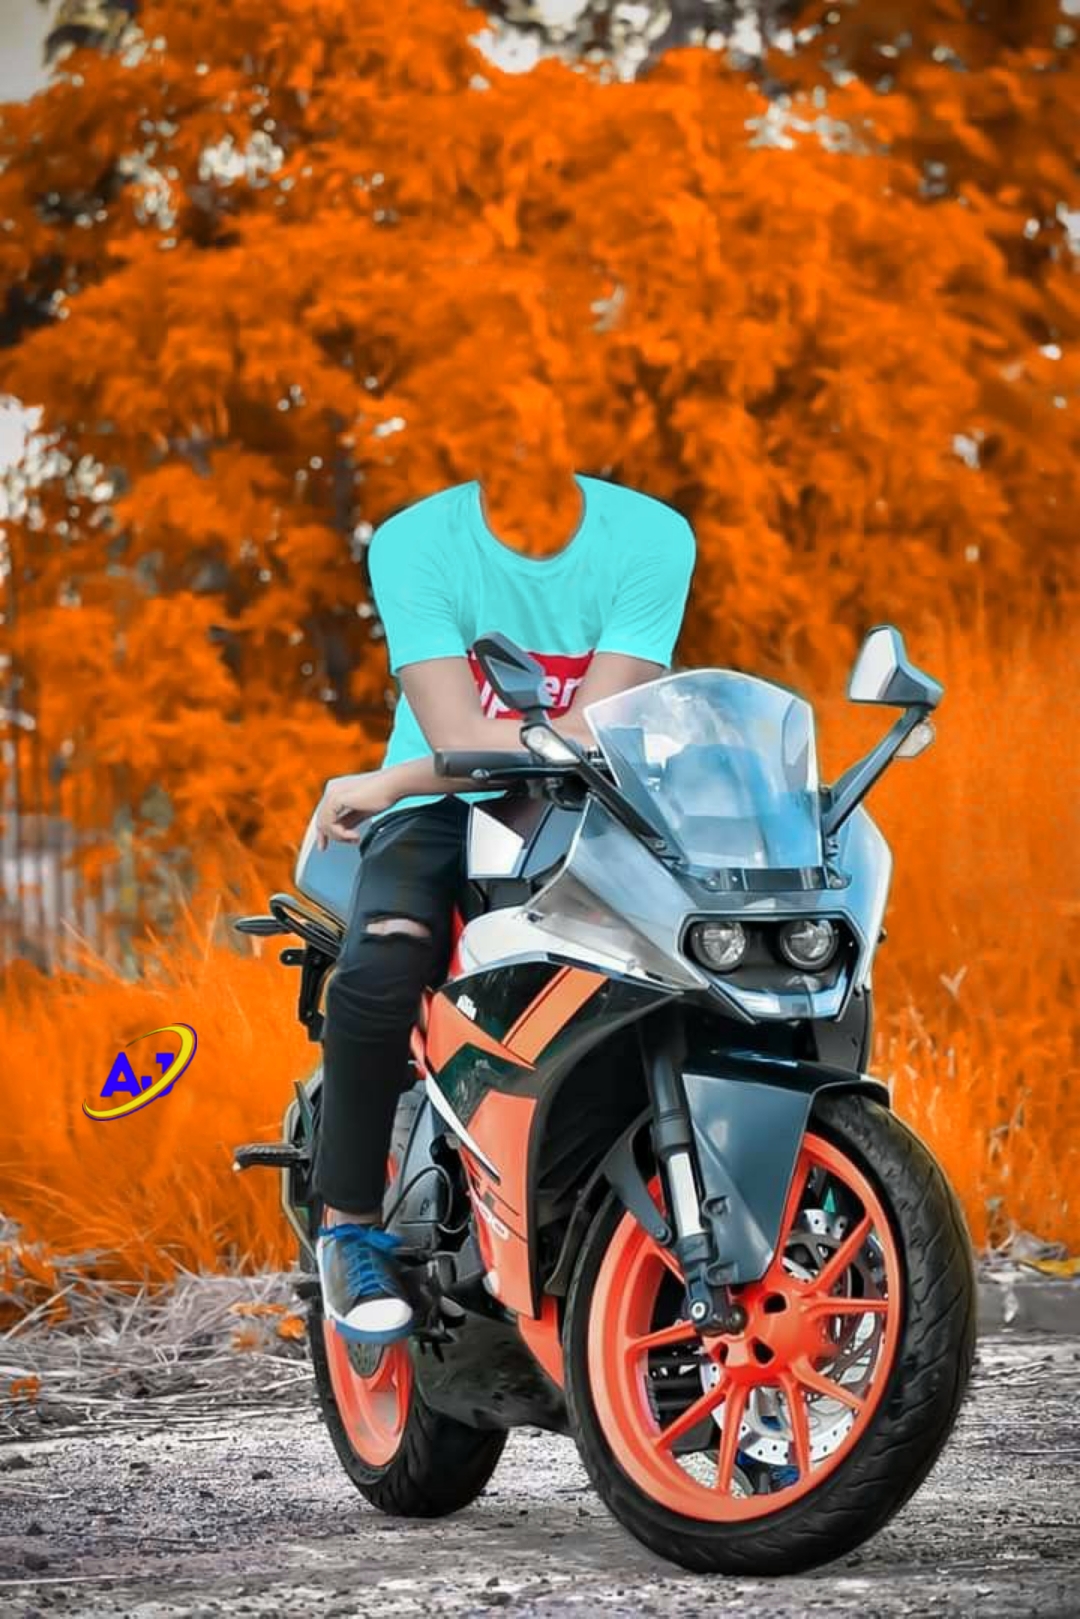 200+ KTM Bike Photo Editing Background Images Hd | 2022 | New Cb Backgrounds for Boys Hd